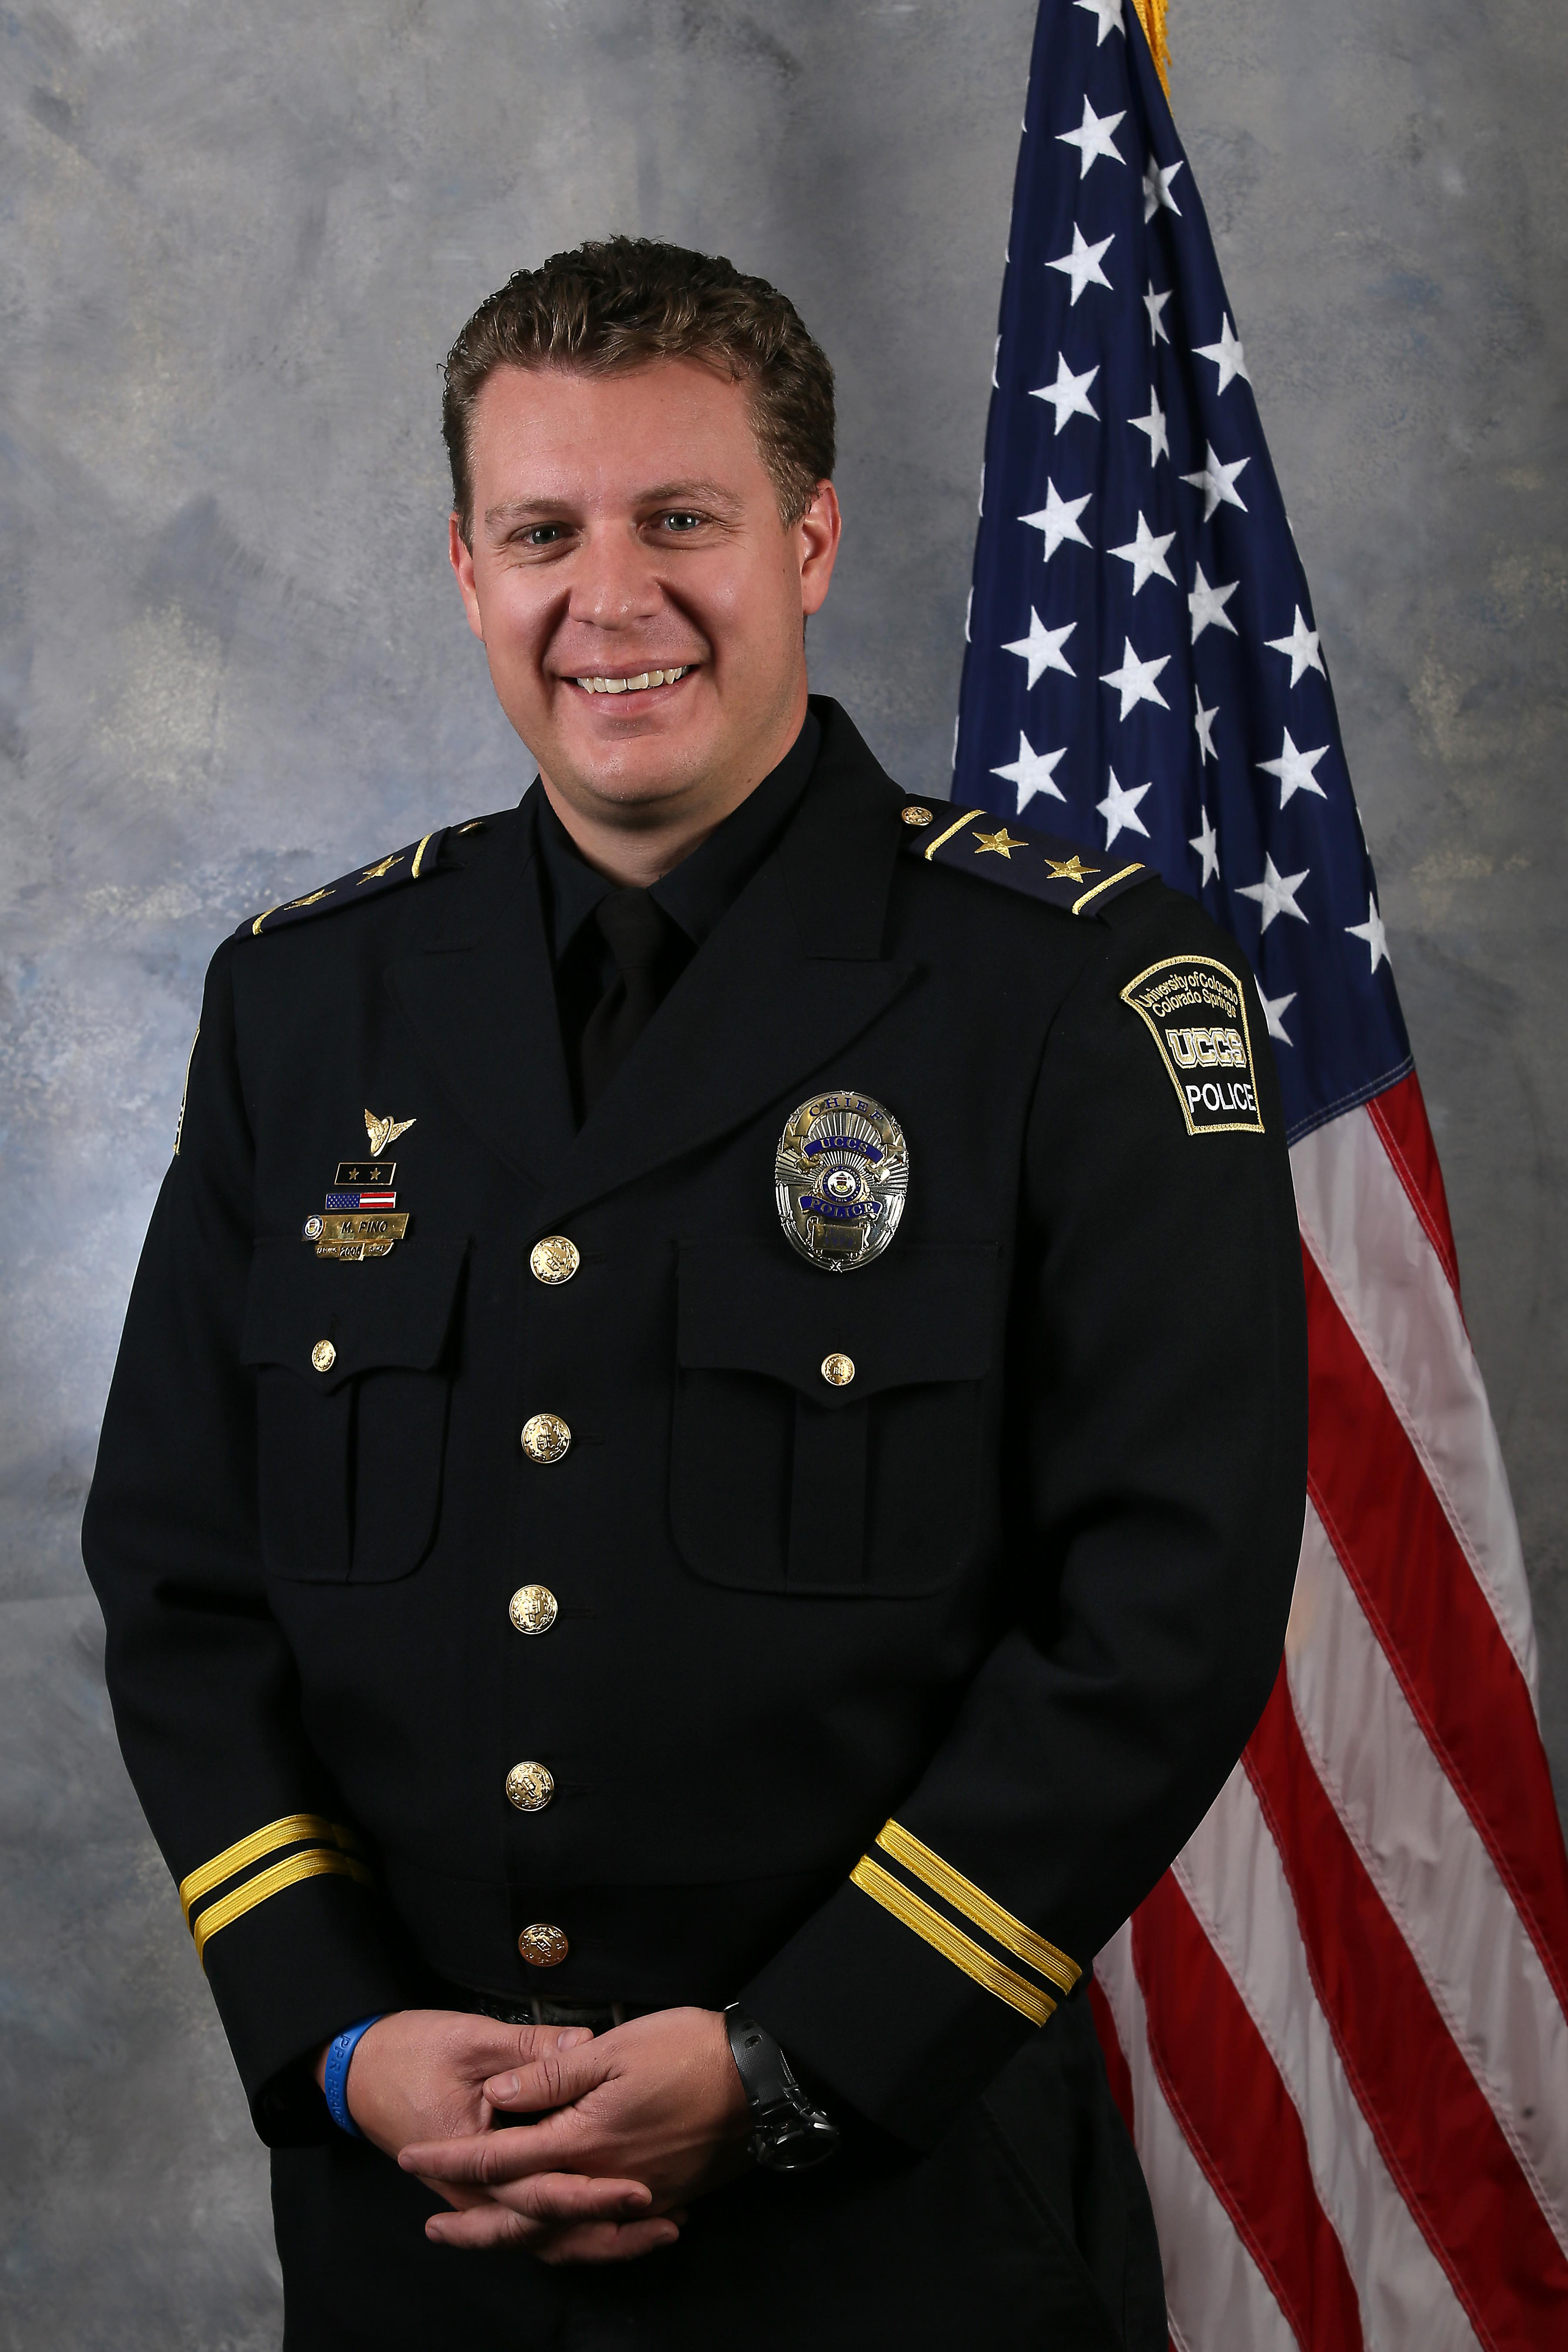 Chiefs Welcome – Sonora Police Department